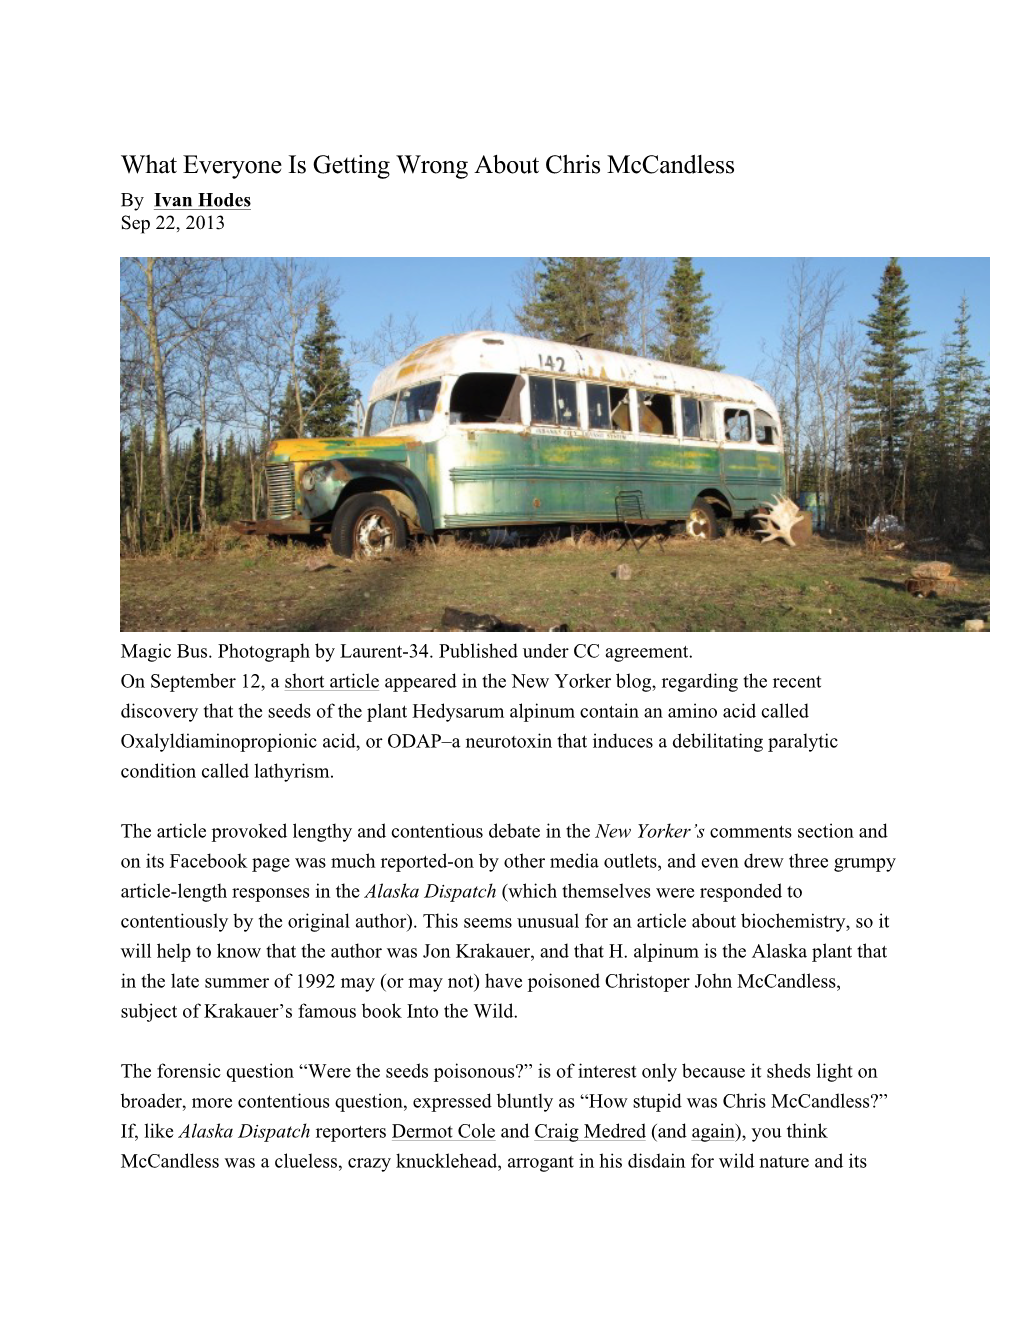 What Everyone Is Getting Wrong About Chris Mccandless by Ivan Hodes Sep 22, 2013